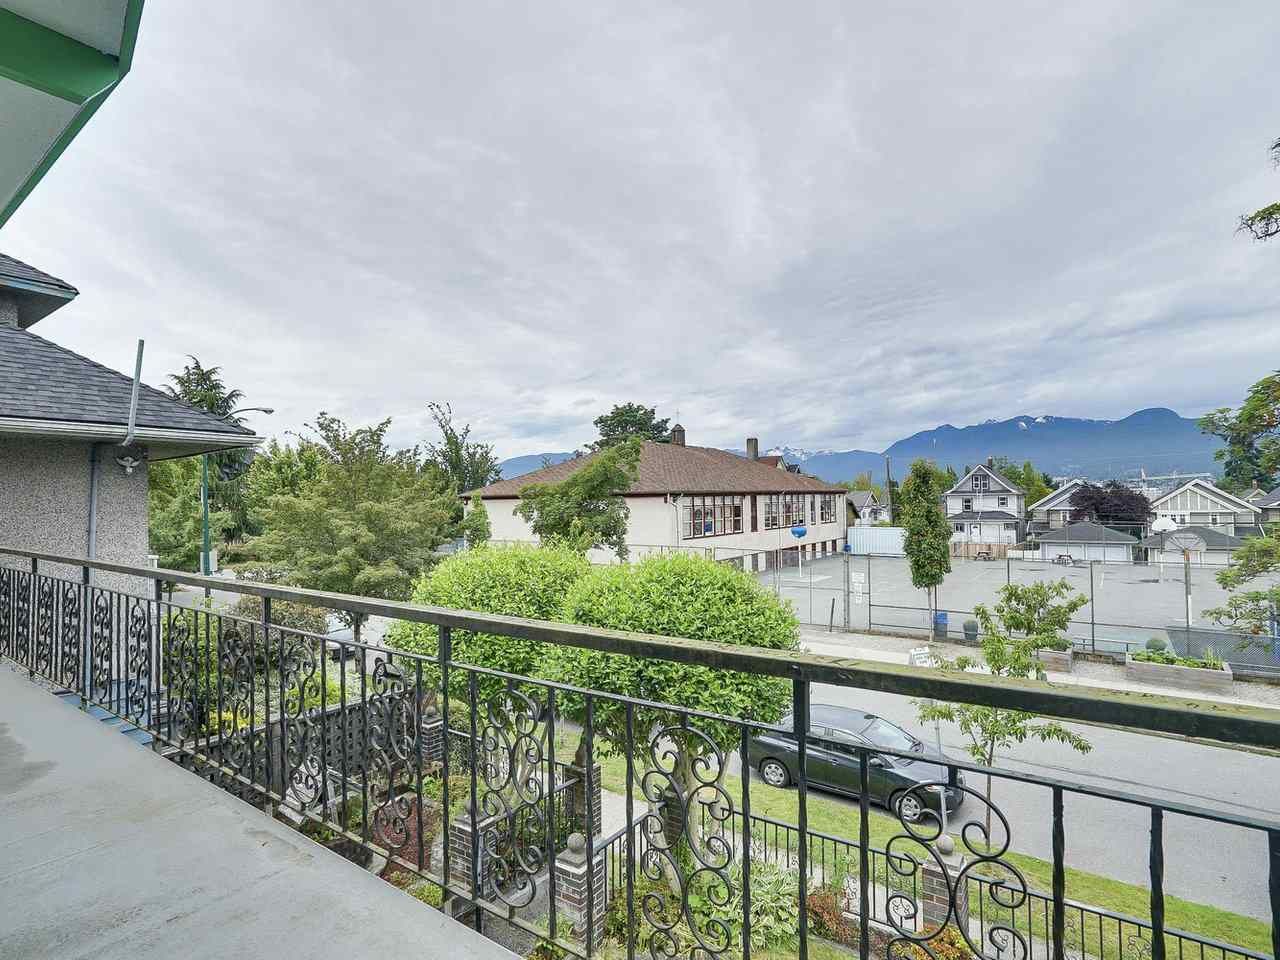 Main Photo: 1928 VENABLES STREET in Vancouver: Grandview VE House for sale (Vancouver East)  : MLS®# R2180121